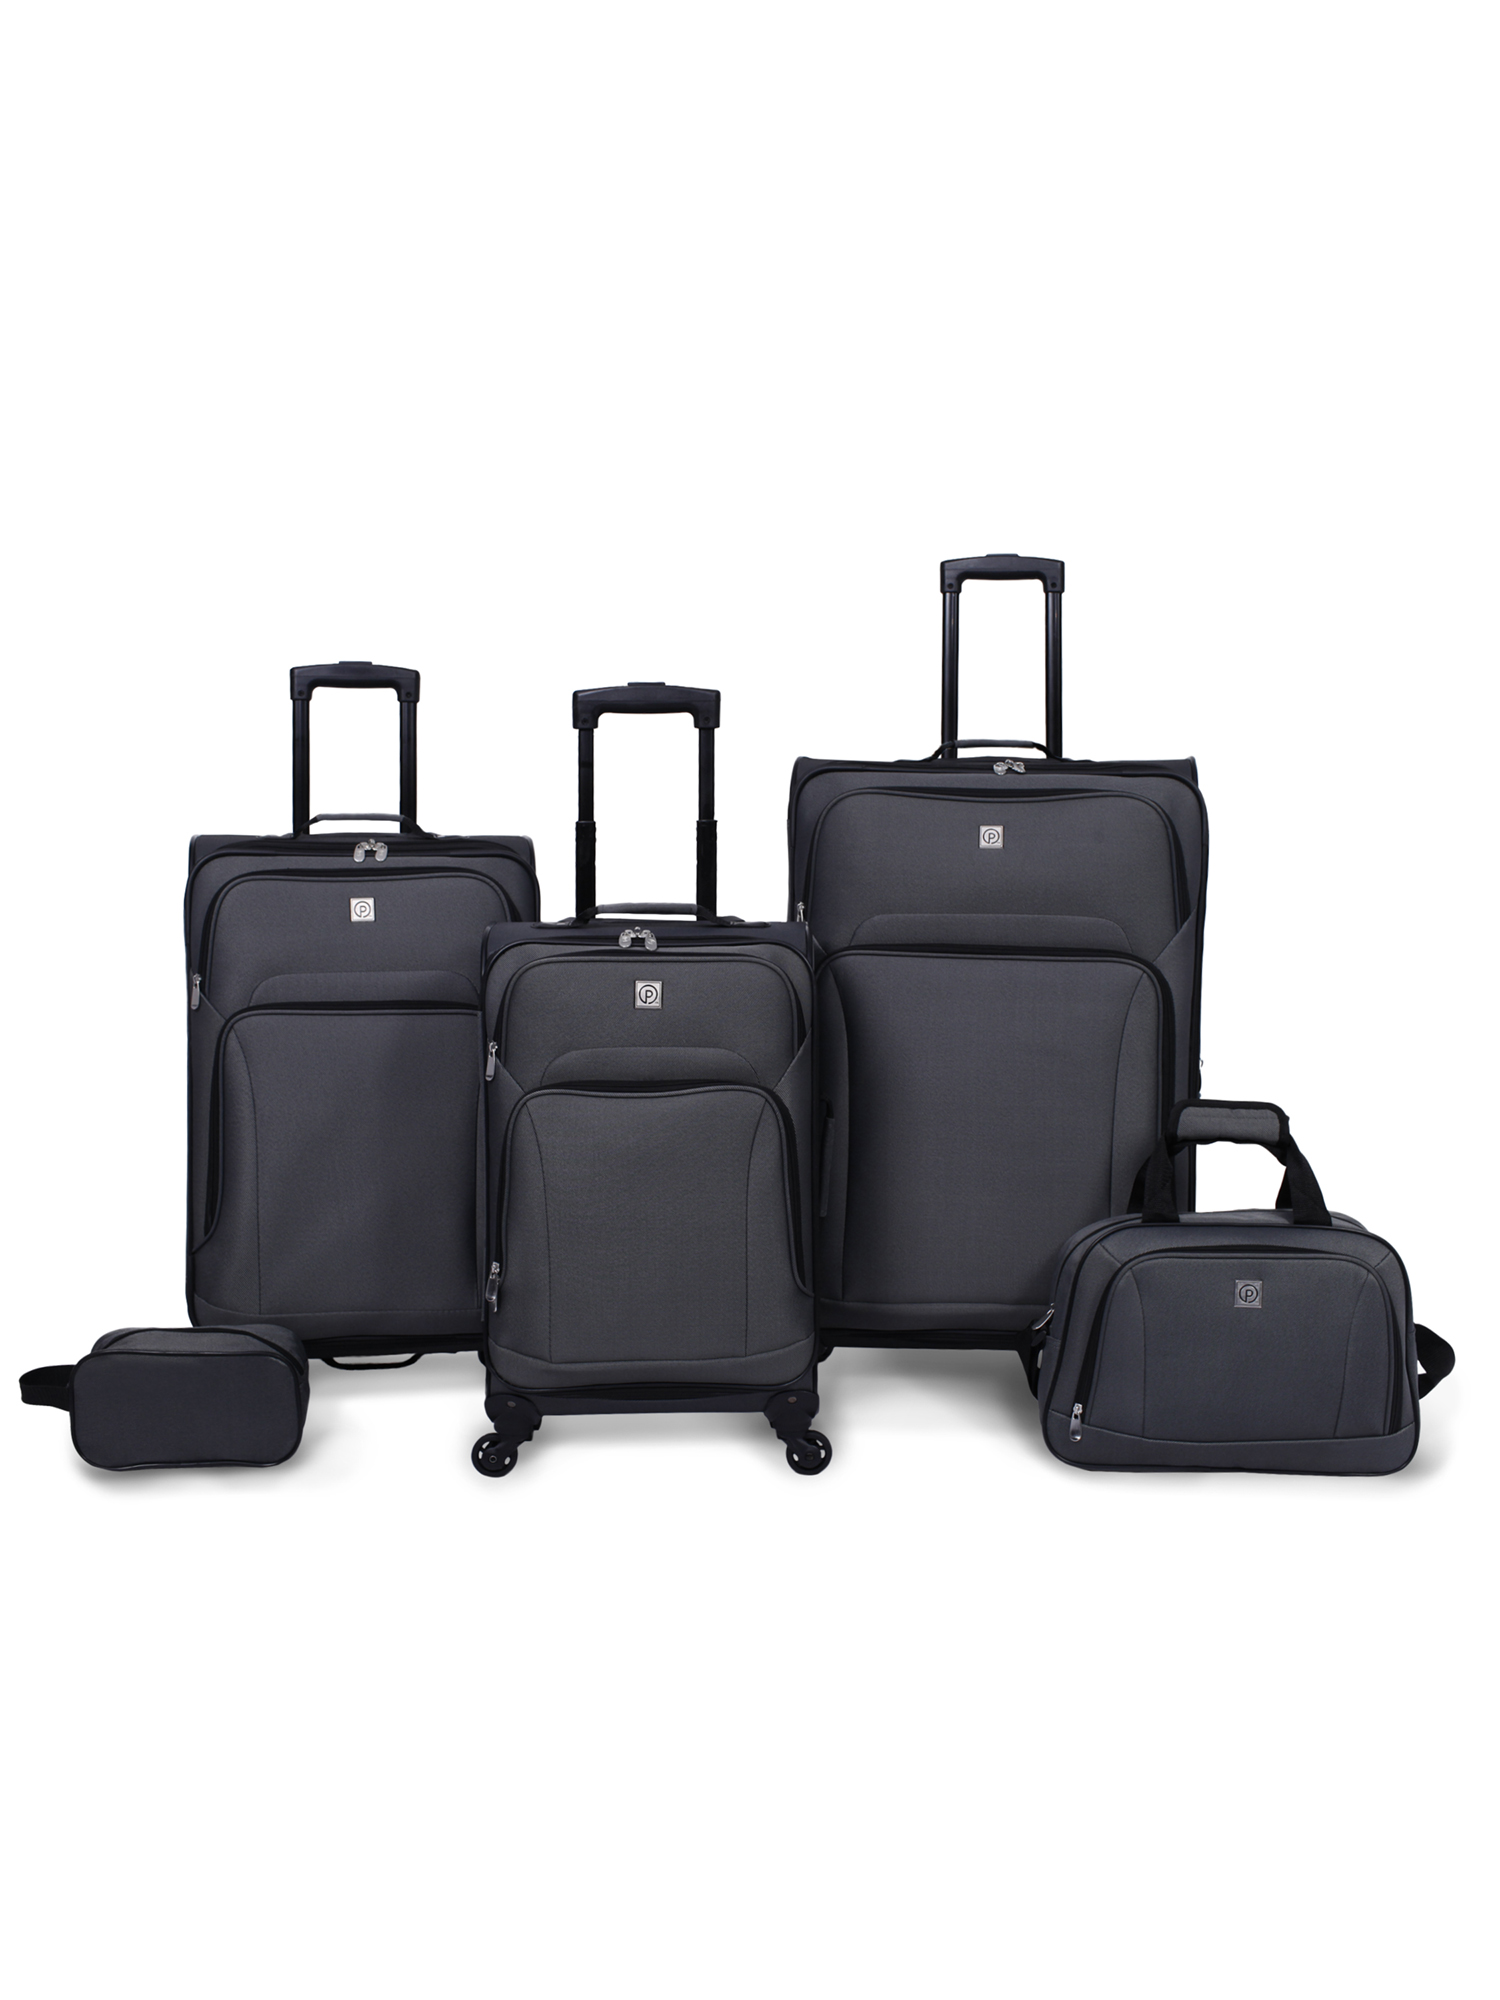 Protege 5 Pc Spinner Luggage Set With 28" & 24" Check Bags, 20" Carry-on, Gray - image 1 of 12